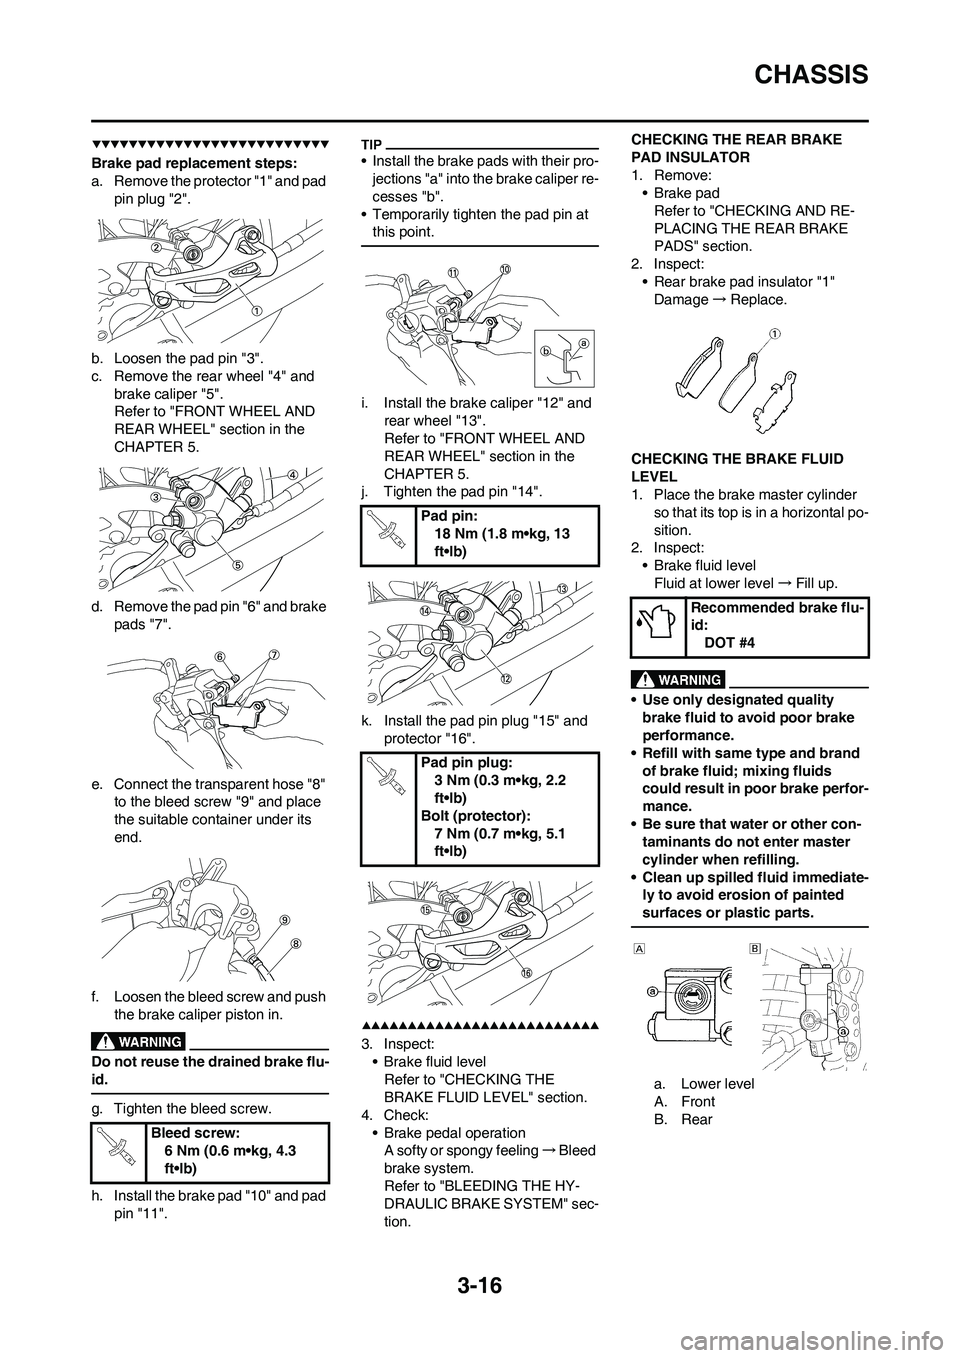 YAMAHA YZ450F 2009  Owners Manual 3-16
CHASSIS
Brake pad replacement steps:
a. Remove the protector "1" and pad 
pin plug "2".
b. Loosen the pad pin "3".
c. Remove the rear wheel "4" and 
brake caliper "5".
Refer to "FRONT WHEEL AND 
